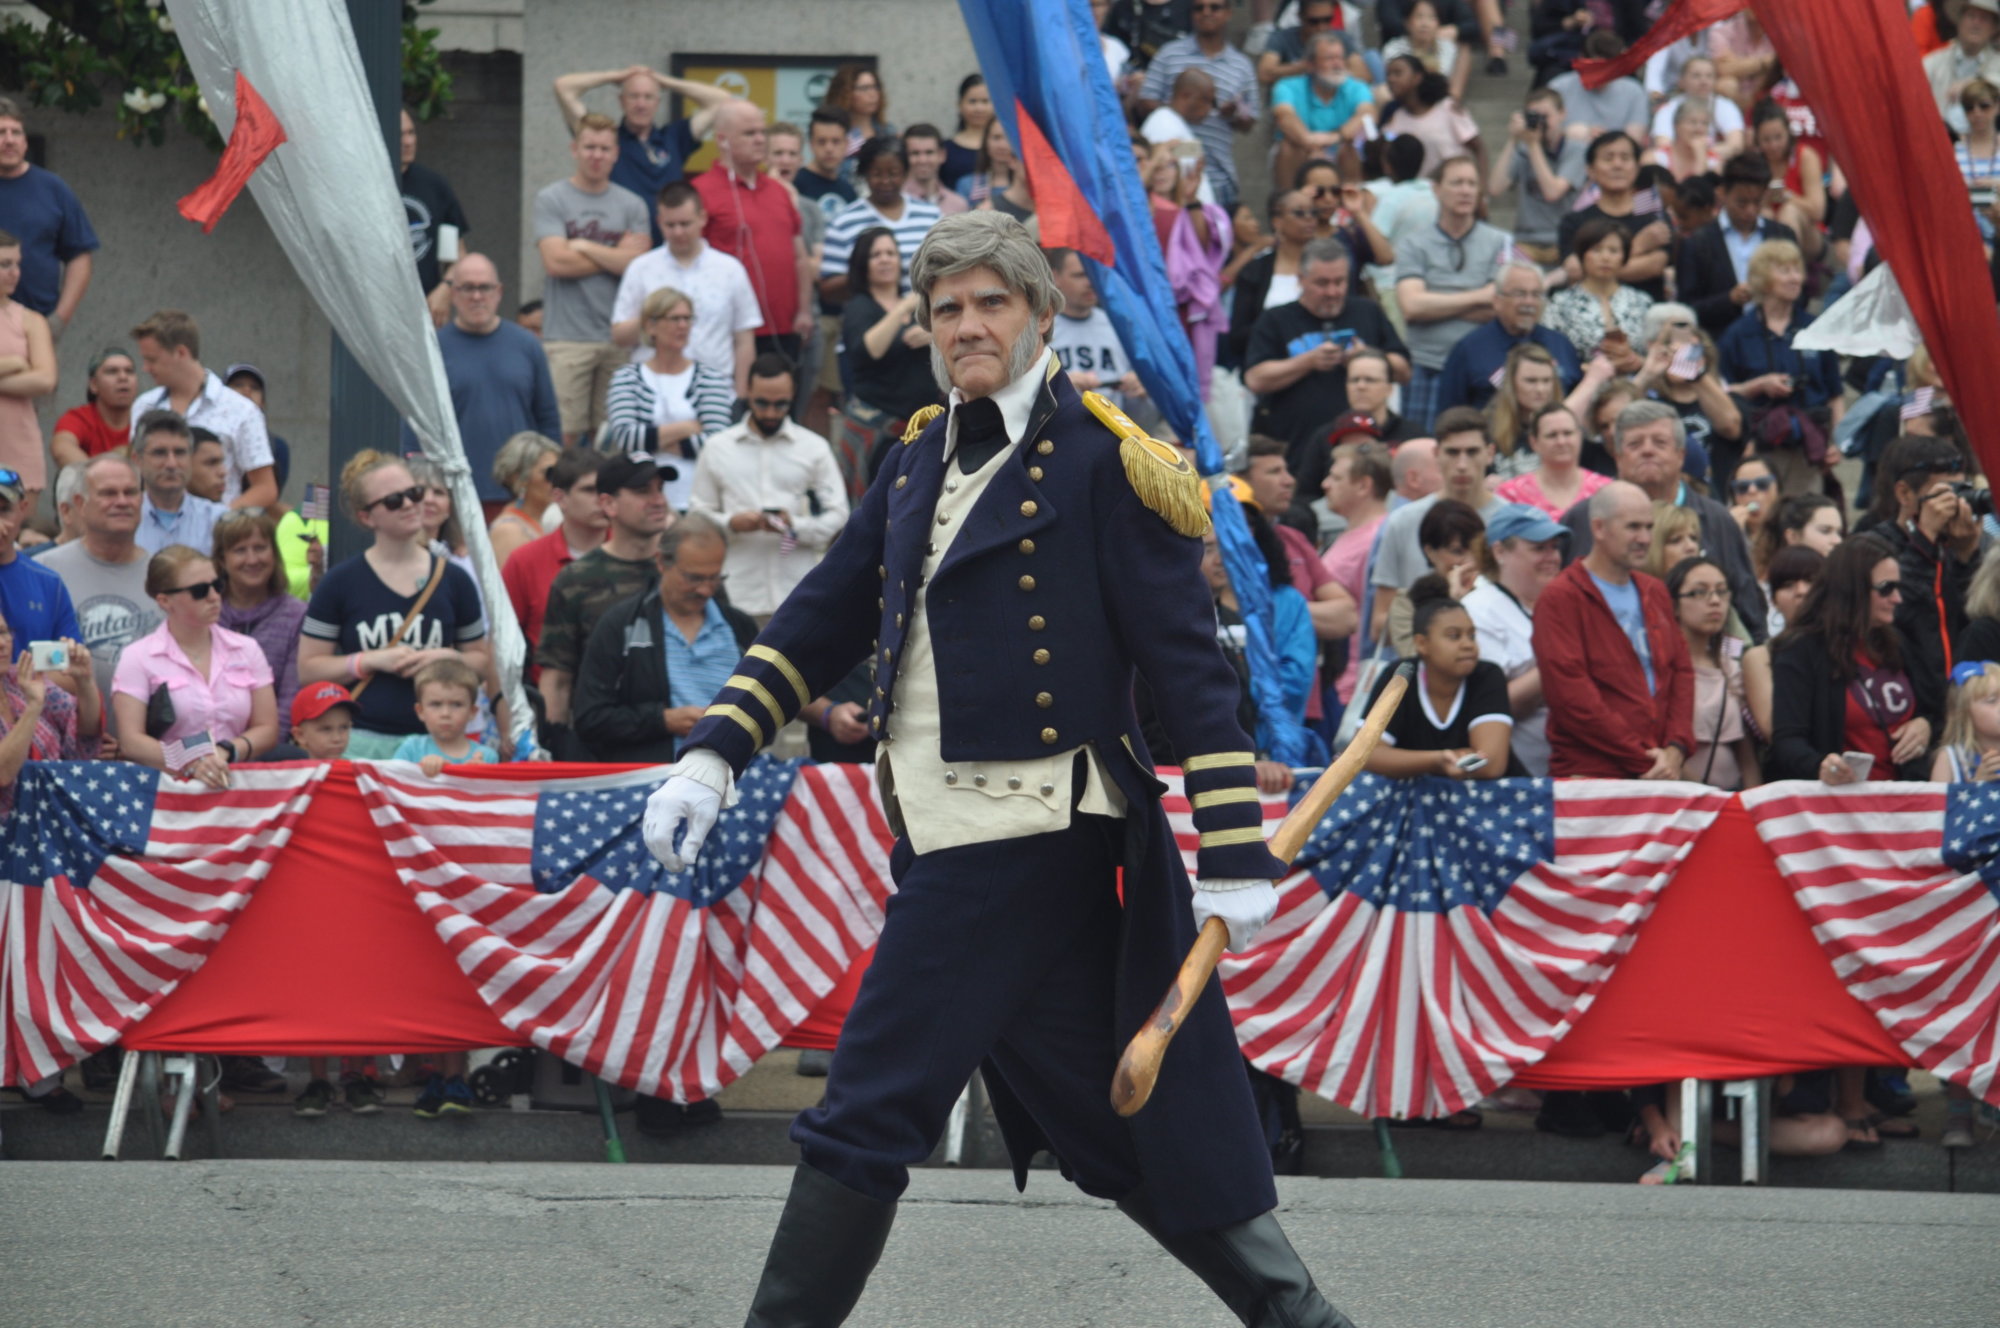 The annual National Memorial Day Parade took place along Constitution Avenue on Monday, May 28, 2018. (Monique Blyther/WTOP)